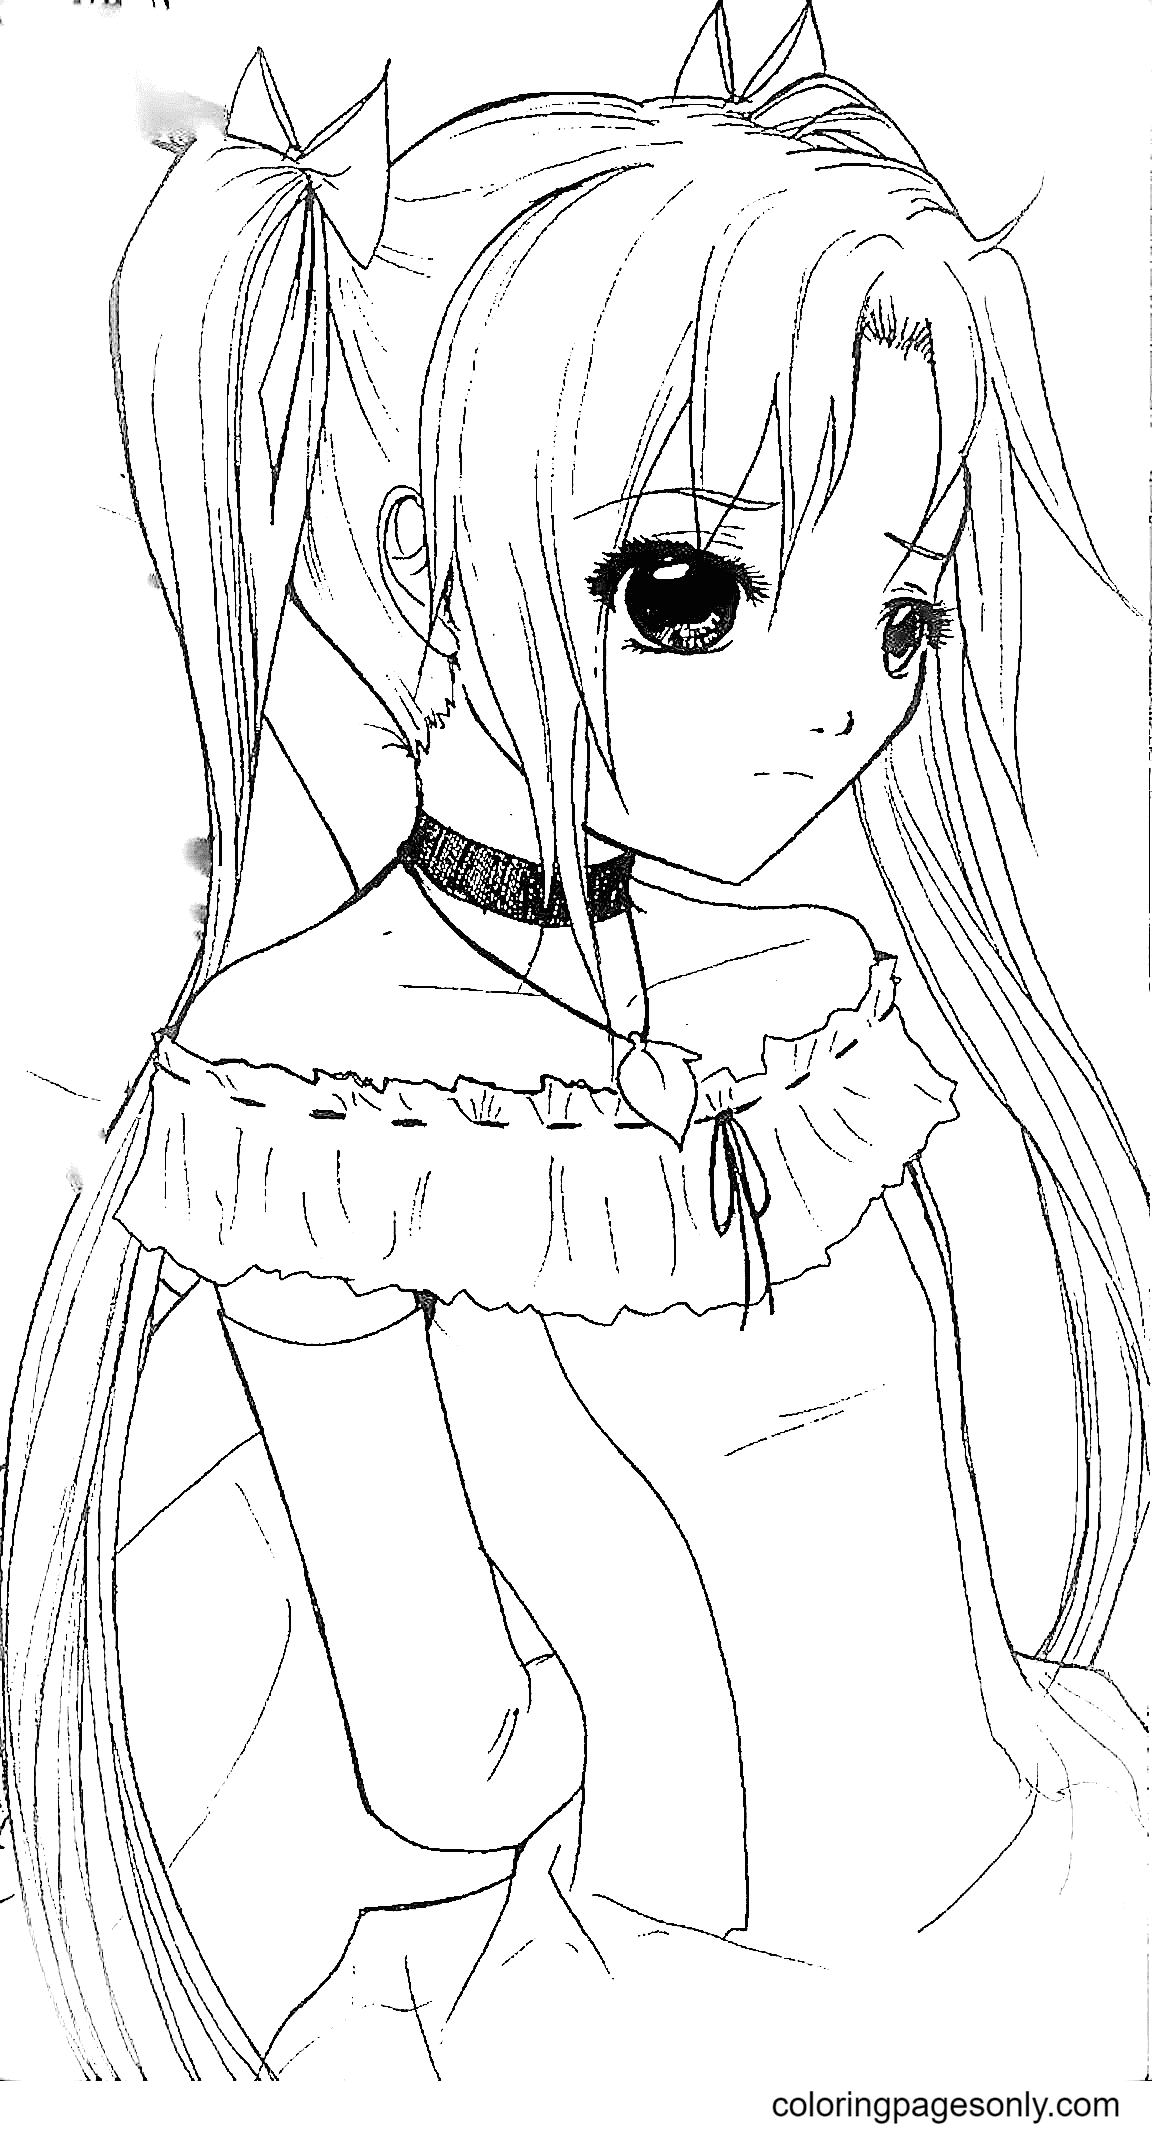 Long Hair Anime Girl Coloring Pages - Coloring Pages For Kids And Adults